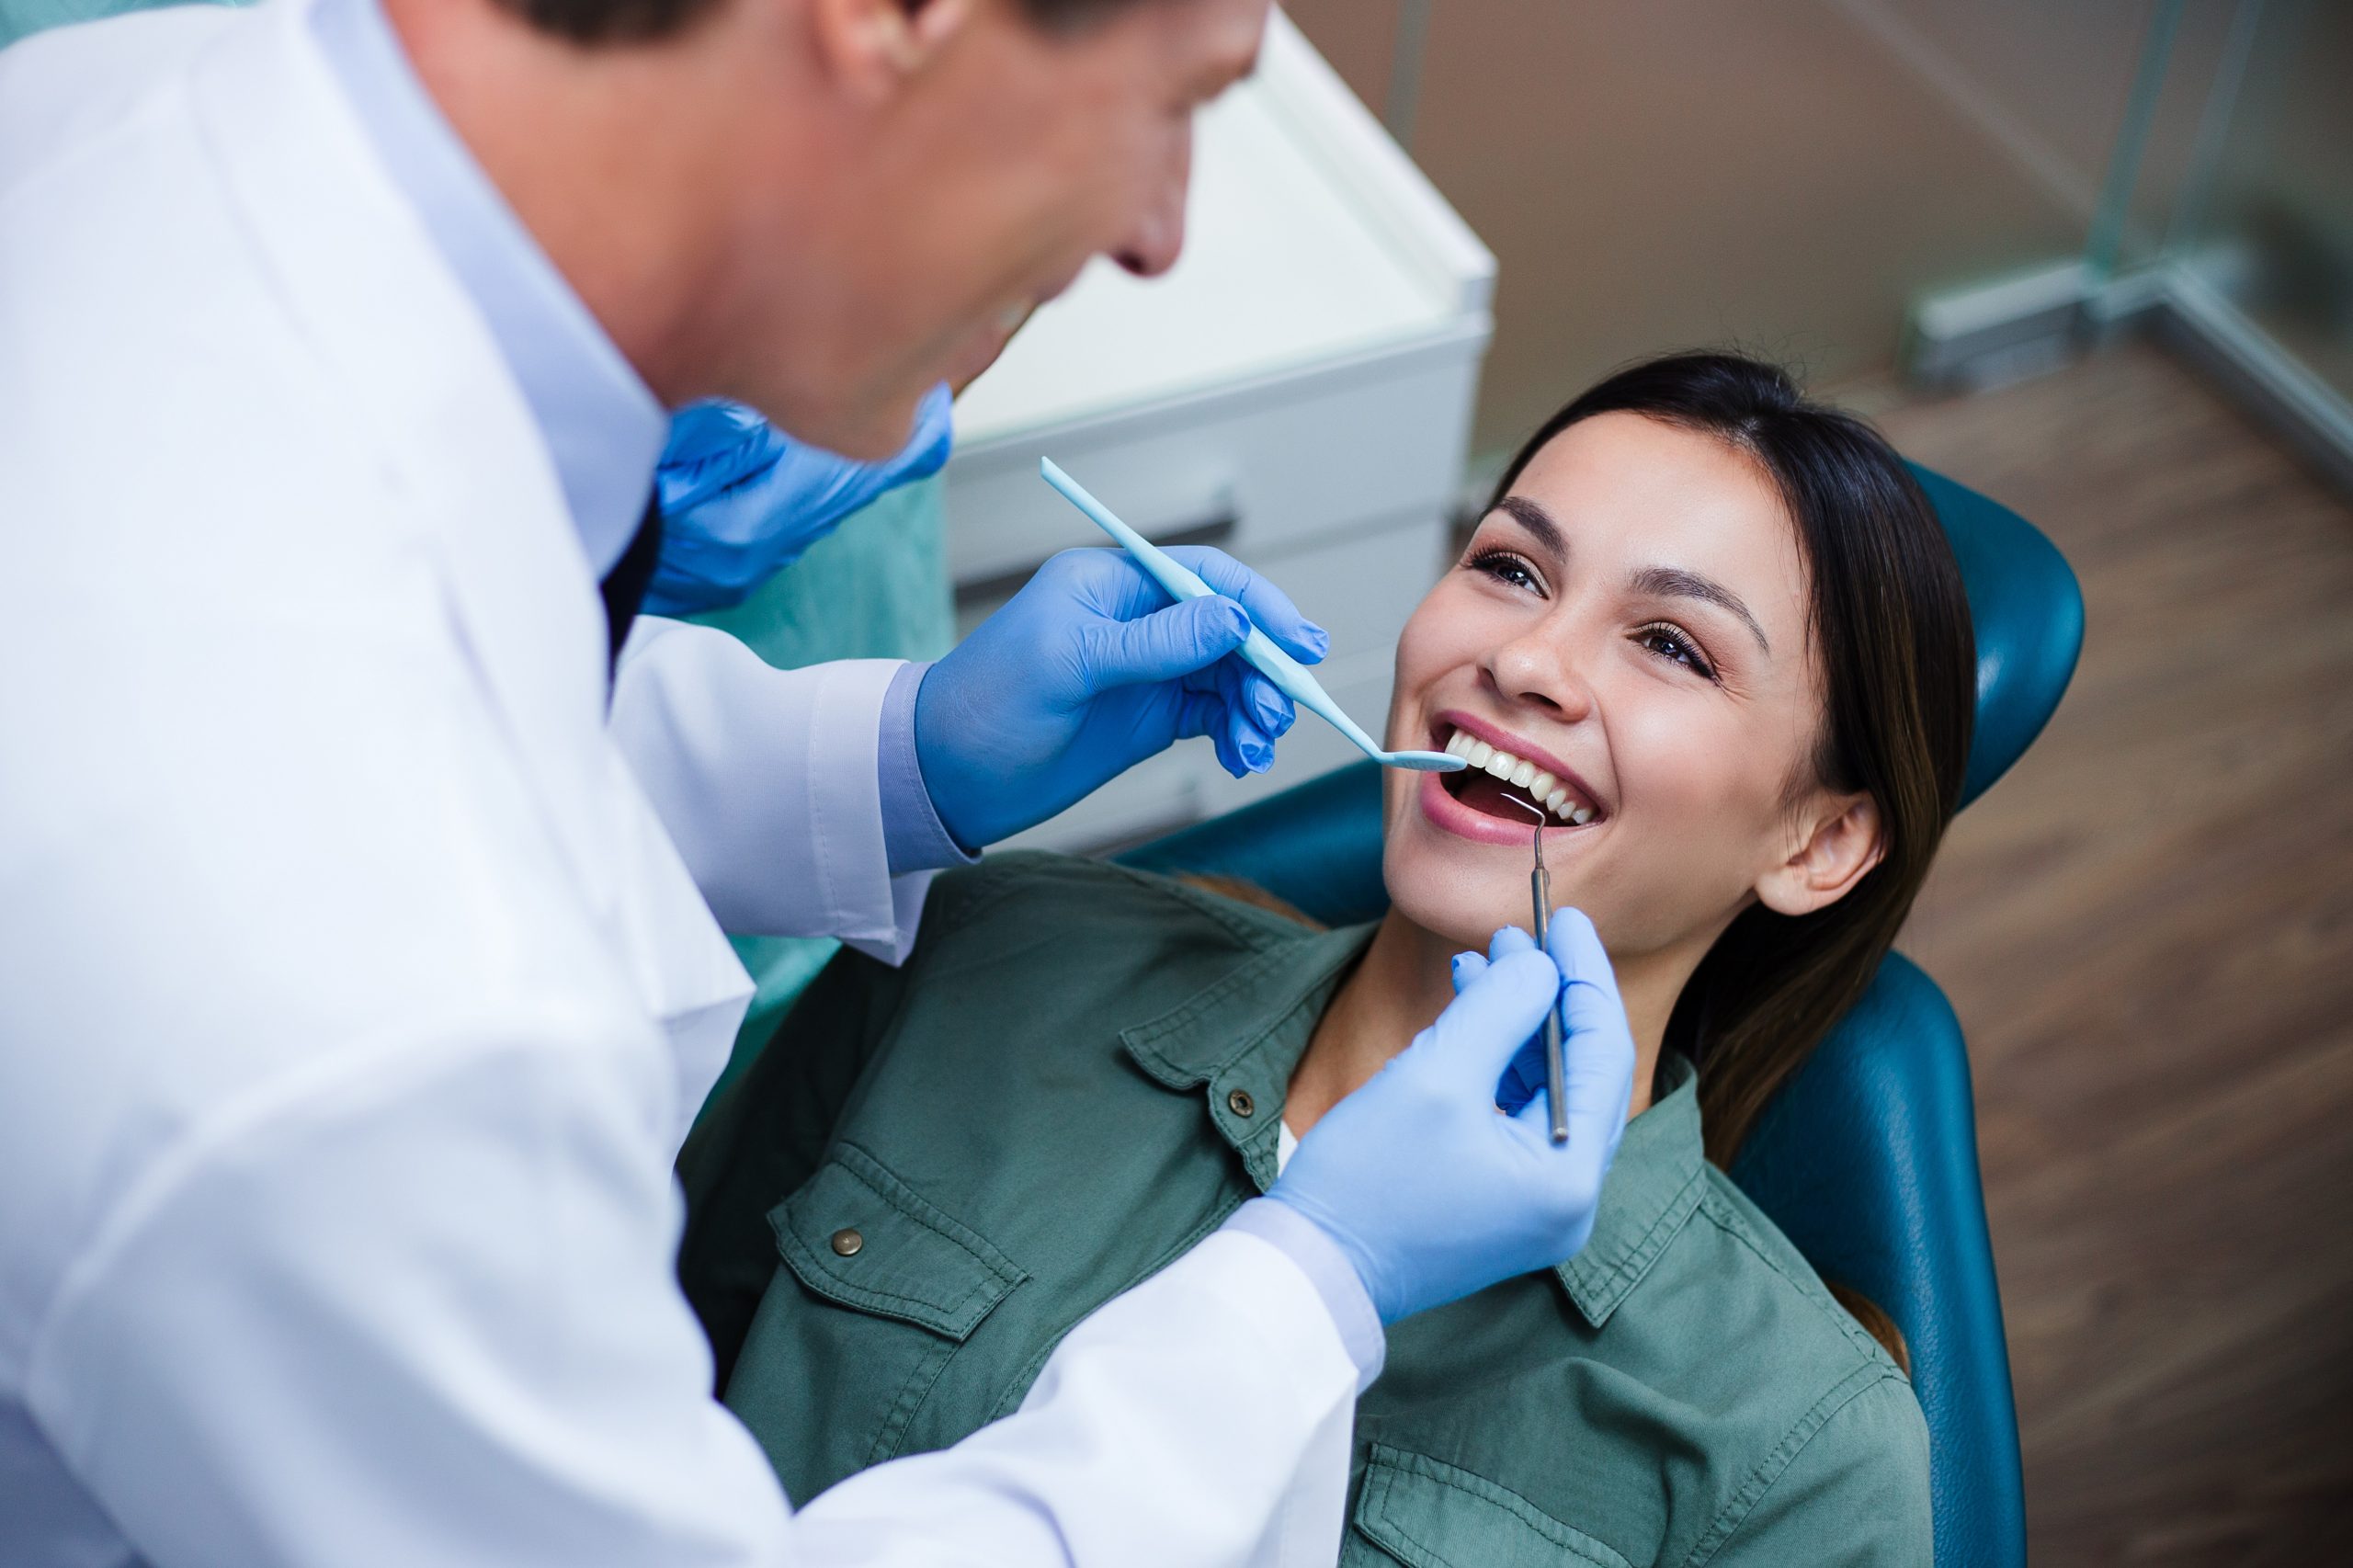 root canal help you maintain excellent oral health